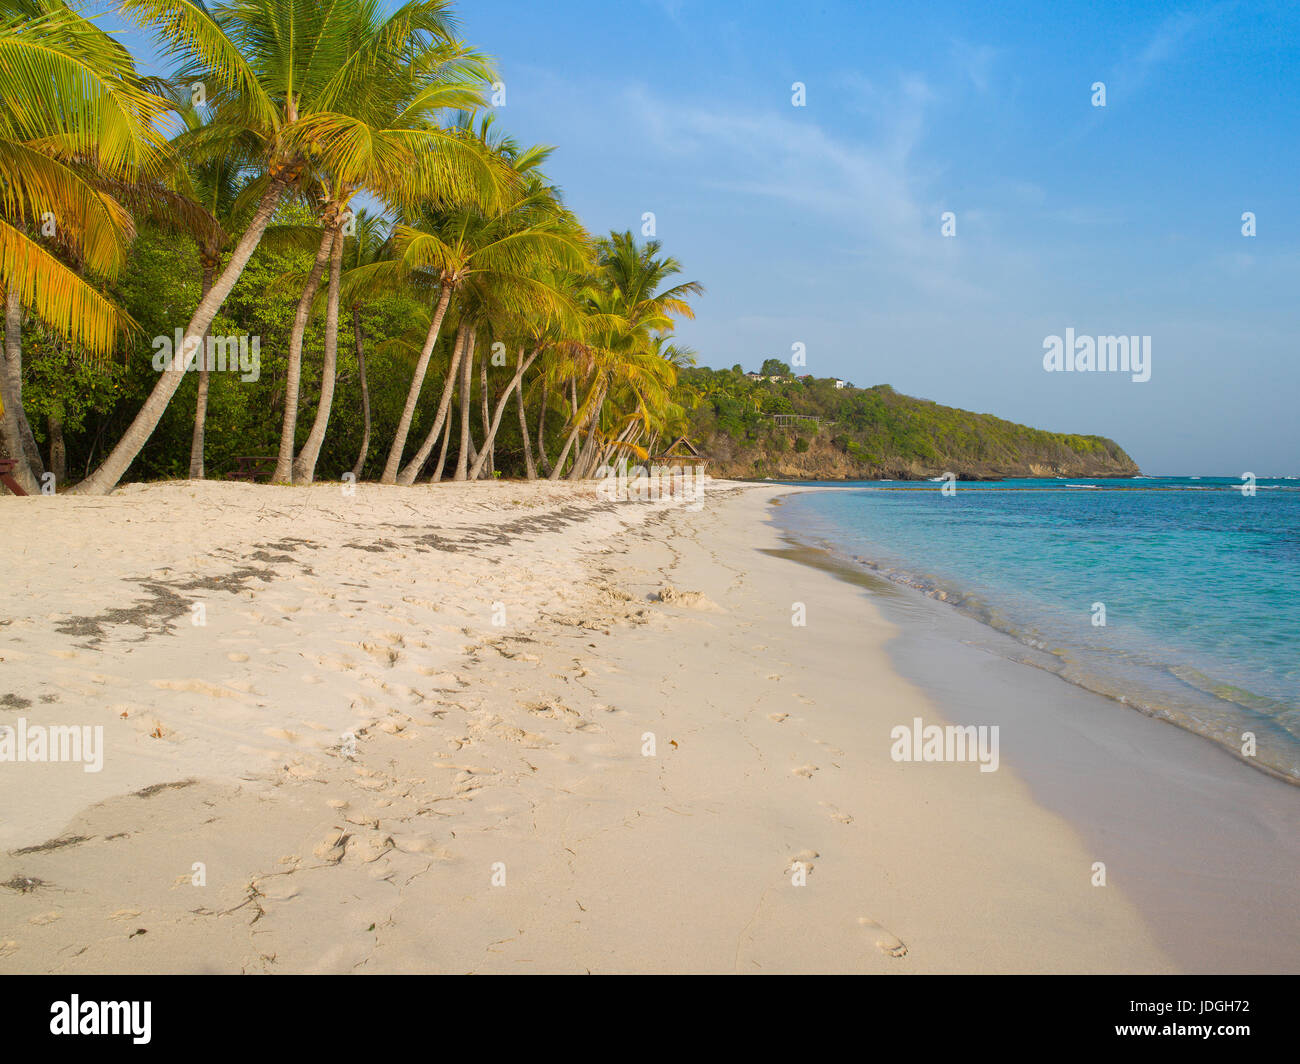 Lagoon Beach, Mustique. A quiet, private and safe beach to snokel and swim in shallow azure blue waters. it has palm tress lining its foreshore. Stock Photo